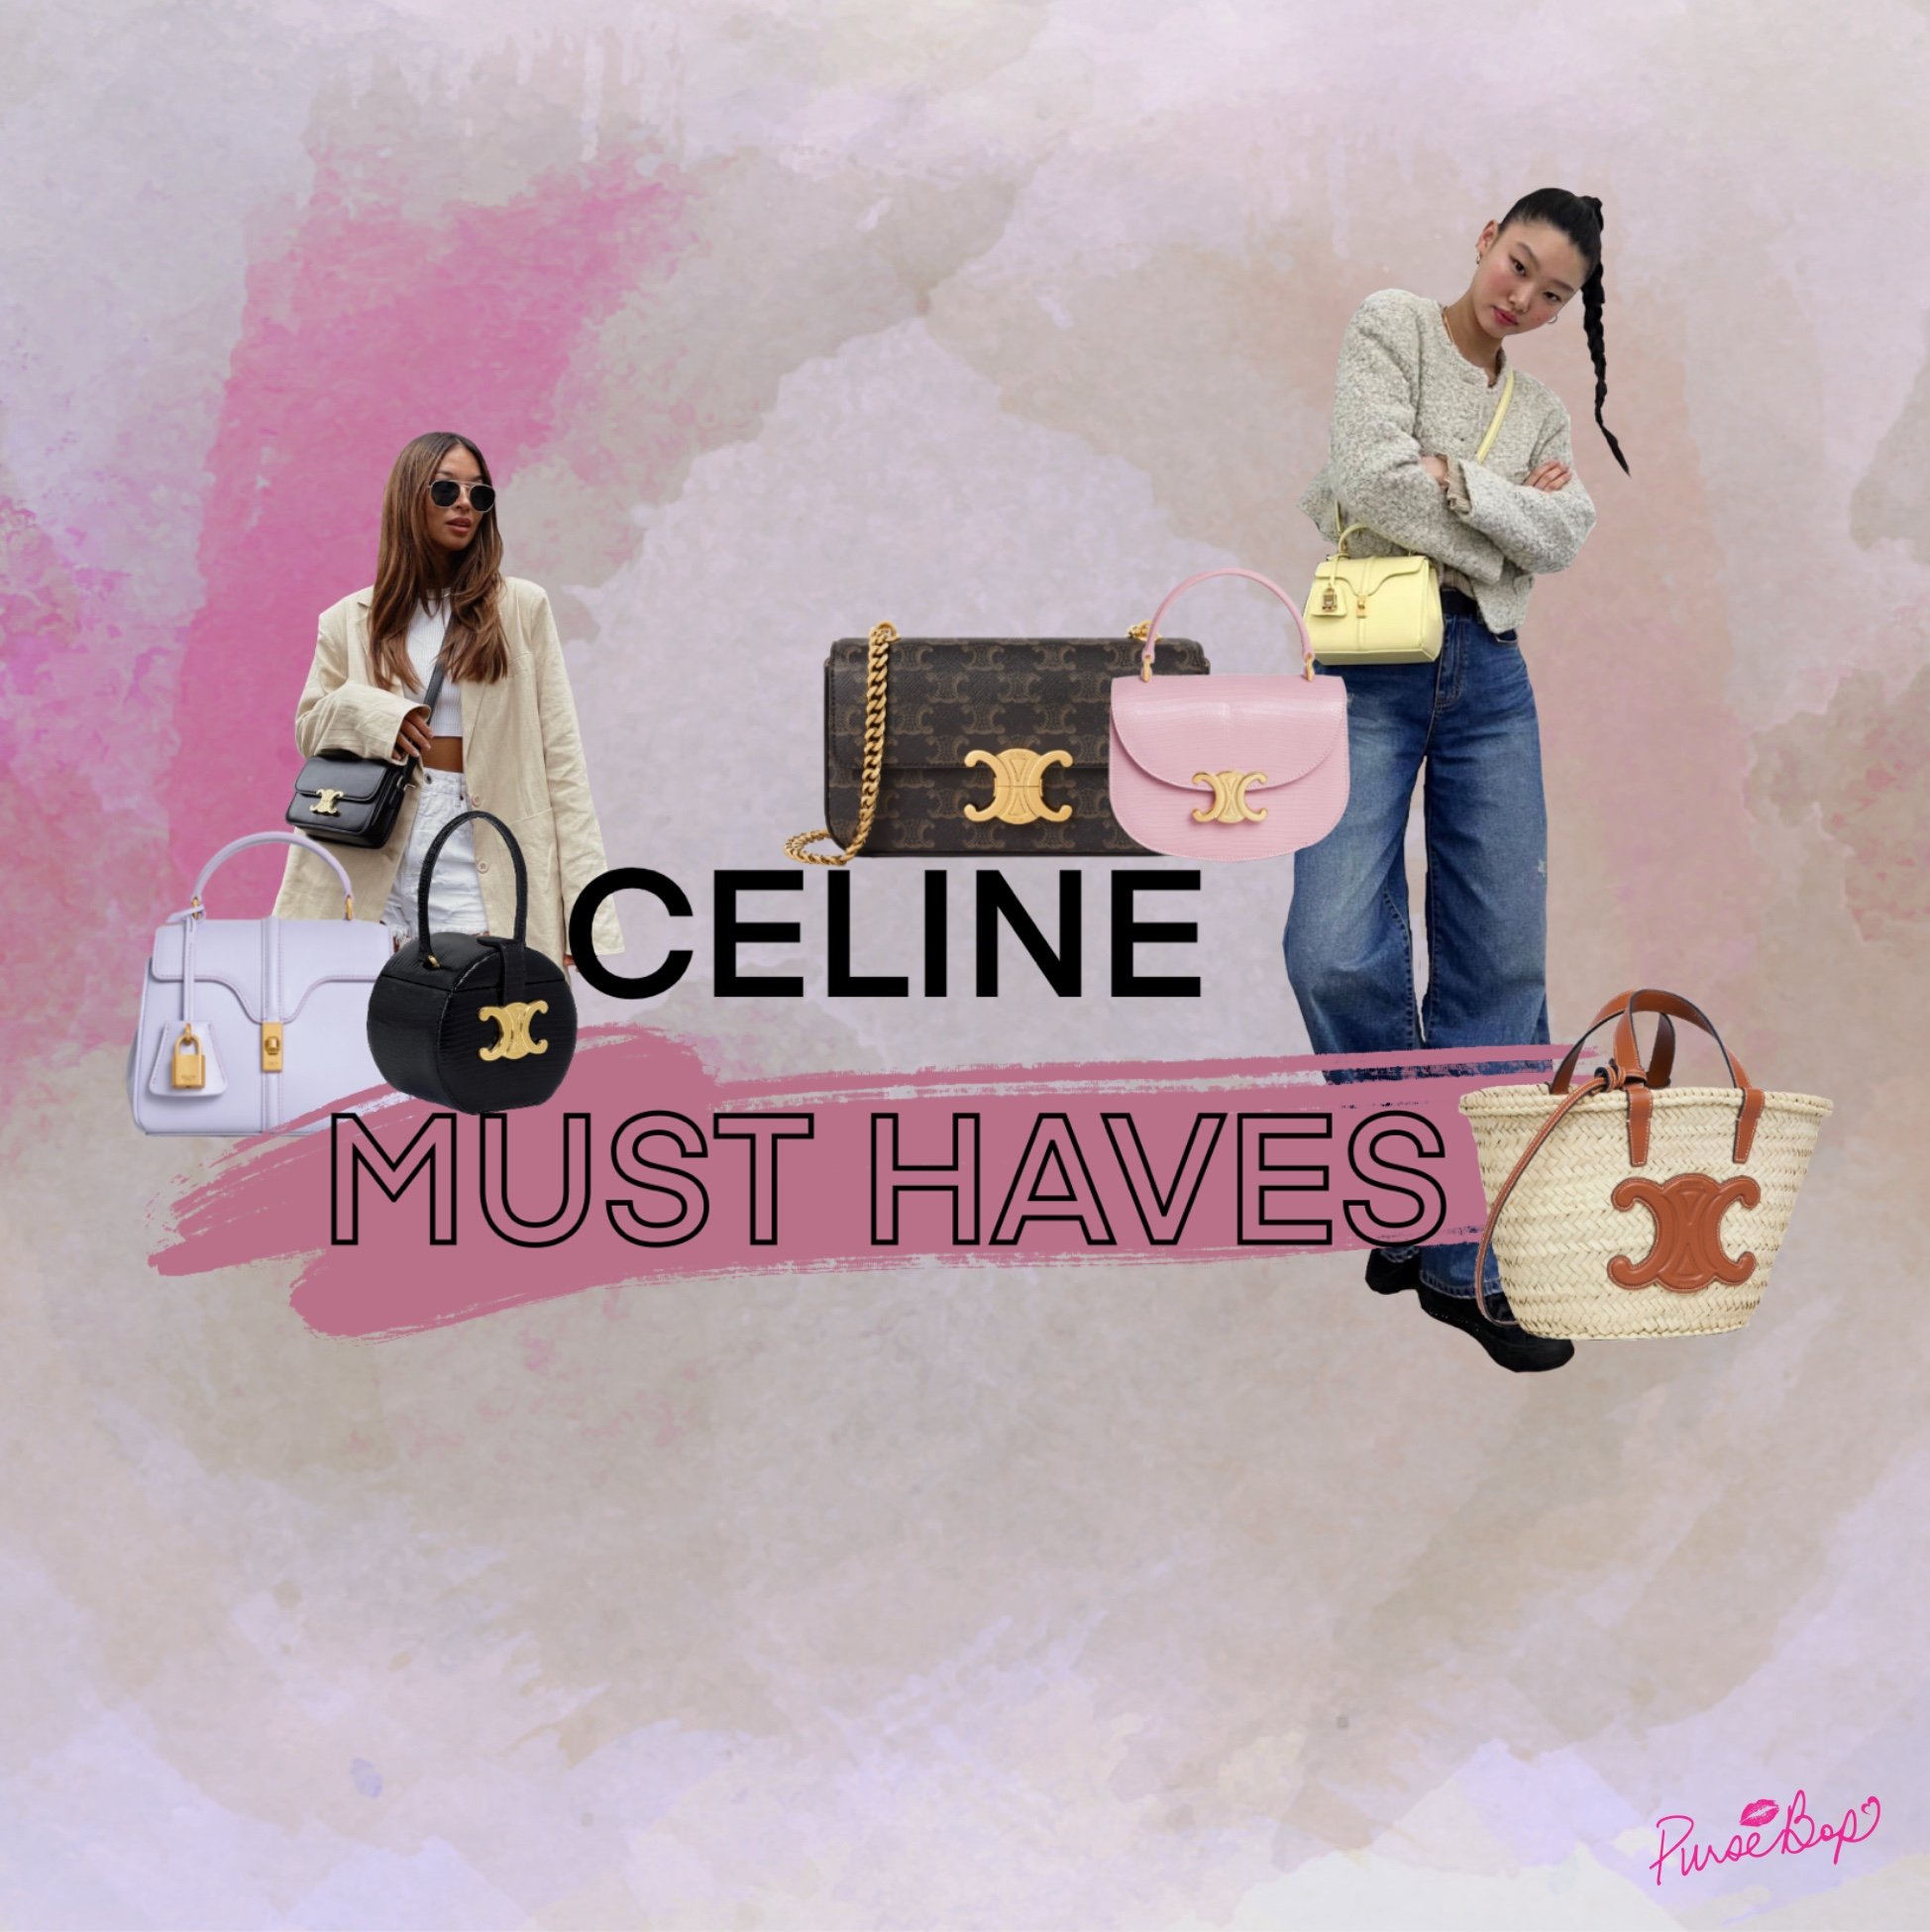 Top designer purses i saw in NYC this week, do you like these as much , Celine Triomphe Bag